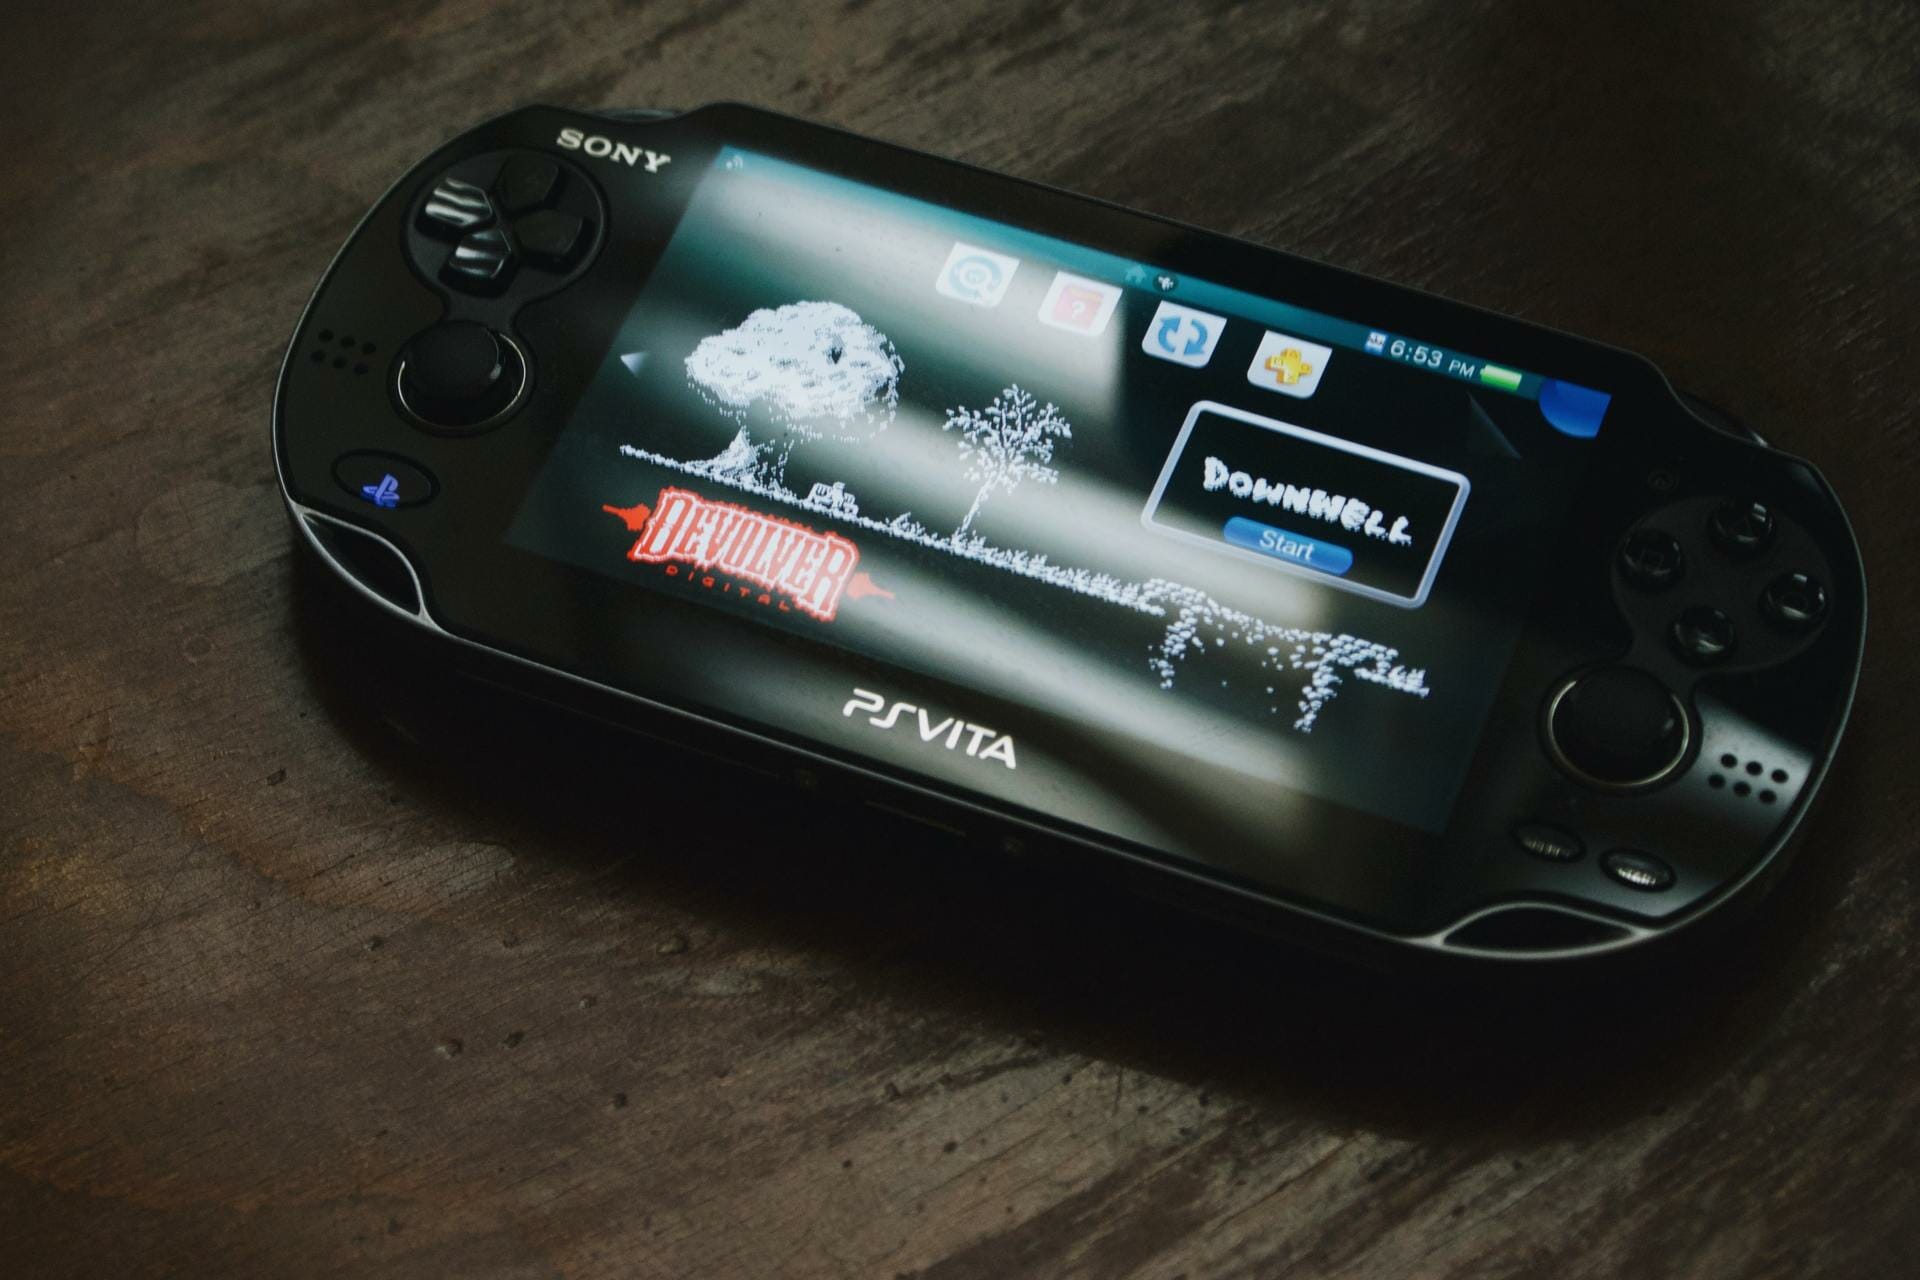 handheld games console with built in games